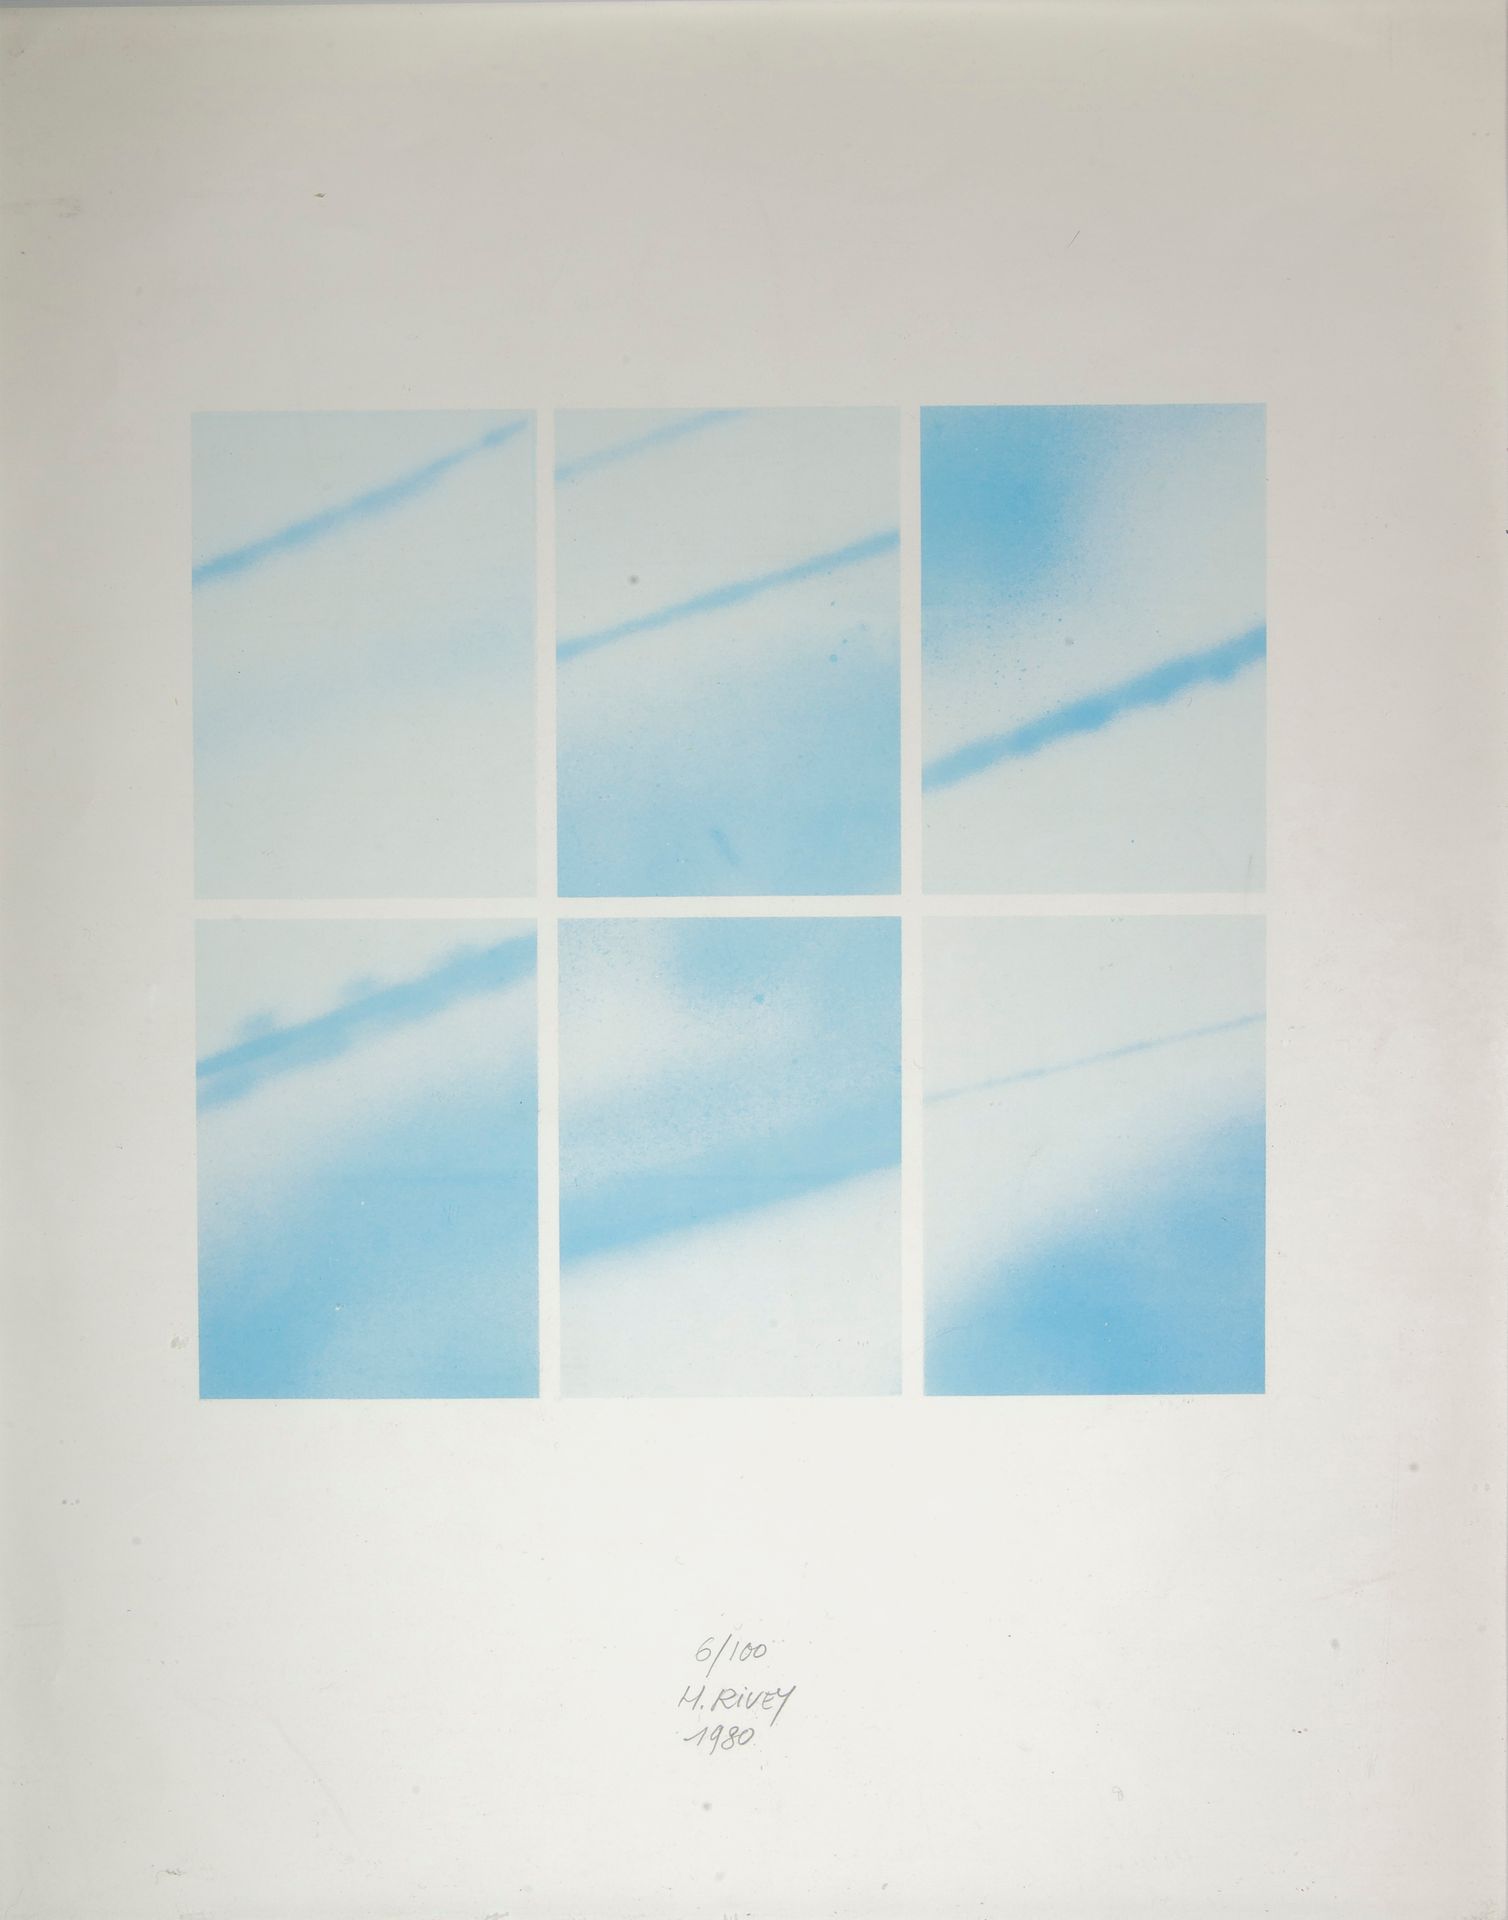 H. RIVEY, Abstract composition

Print signed in pencil in the lower center, date&hellip;